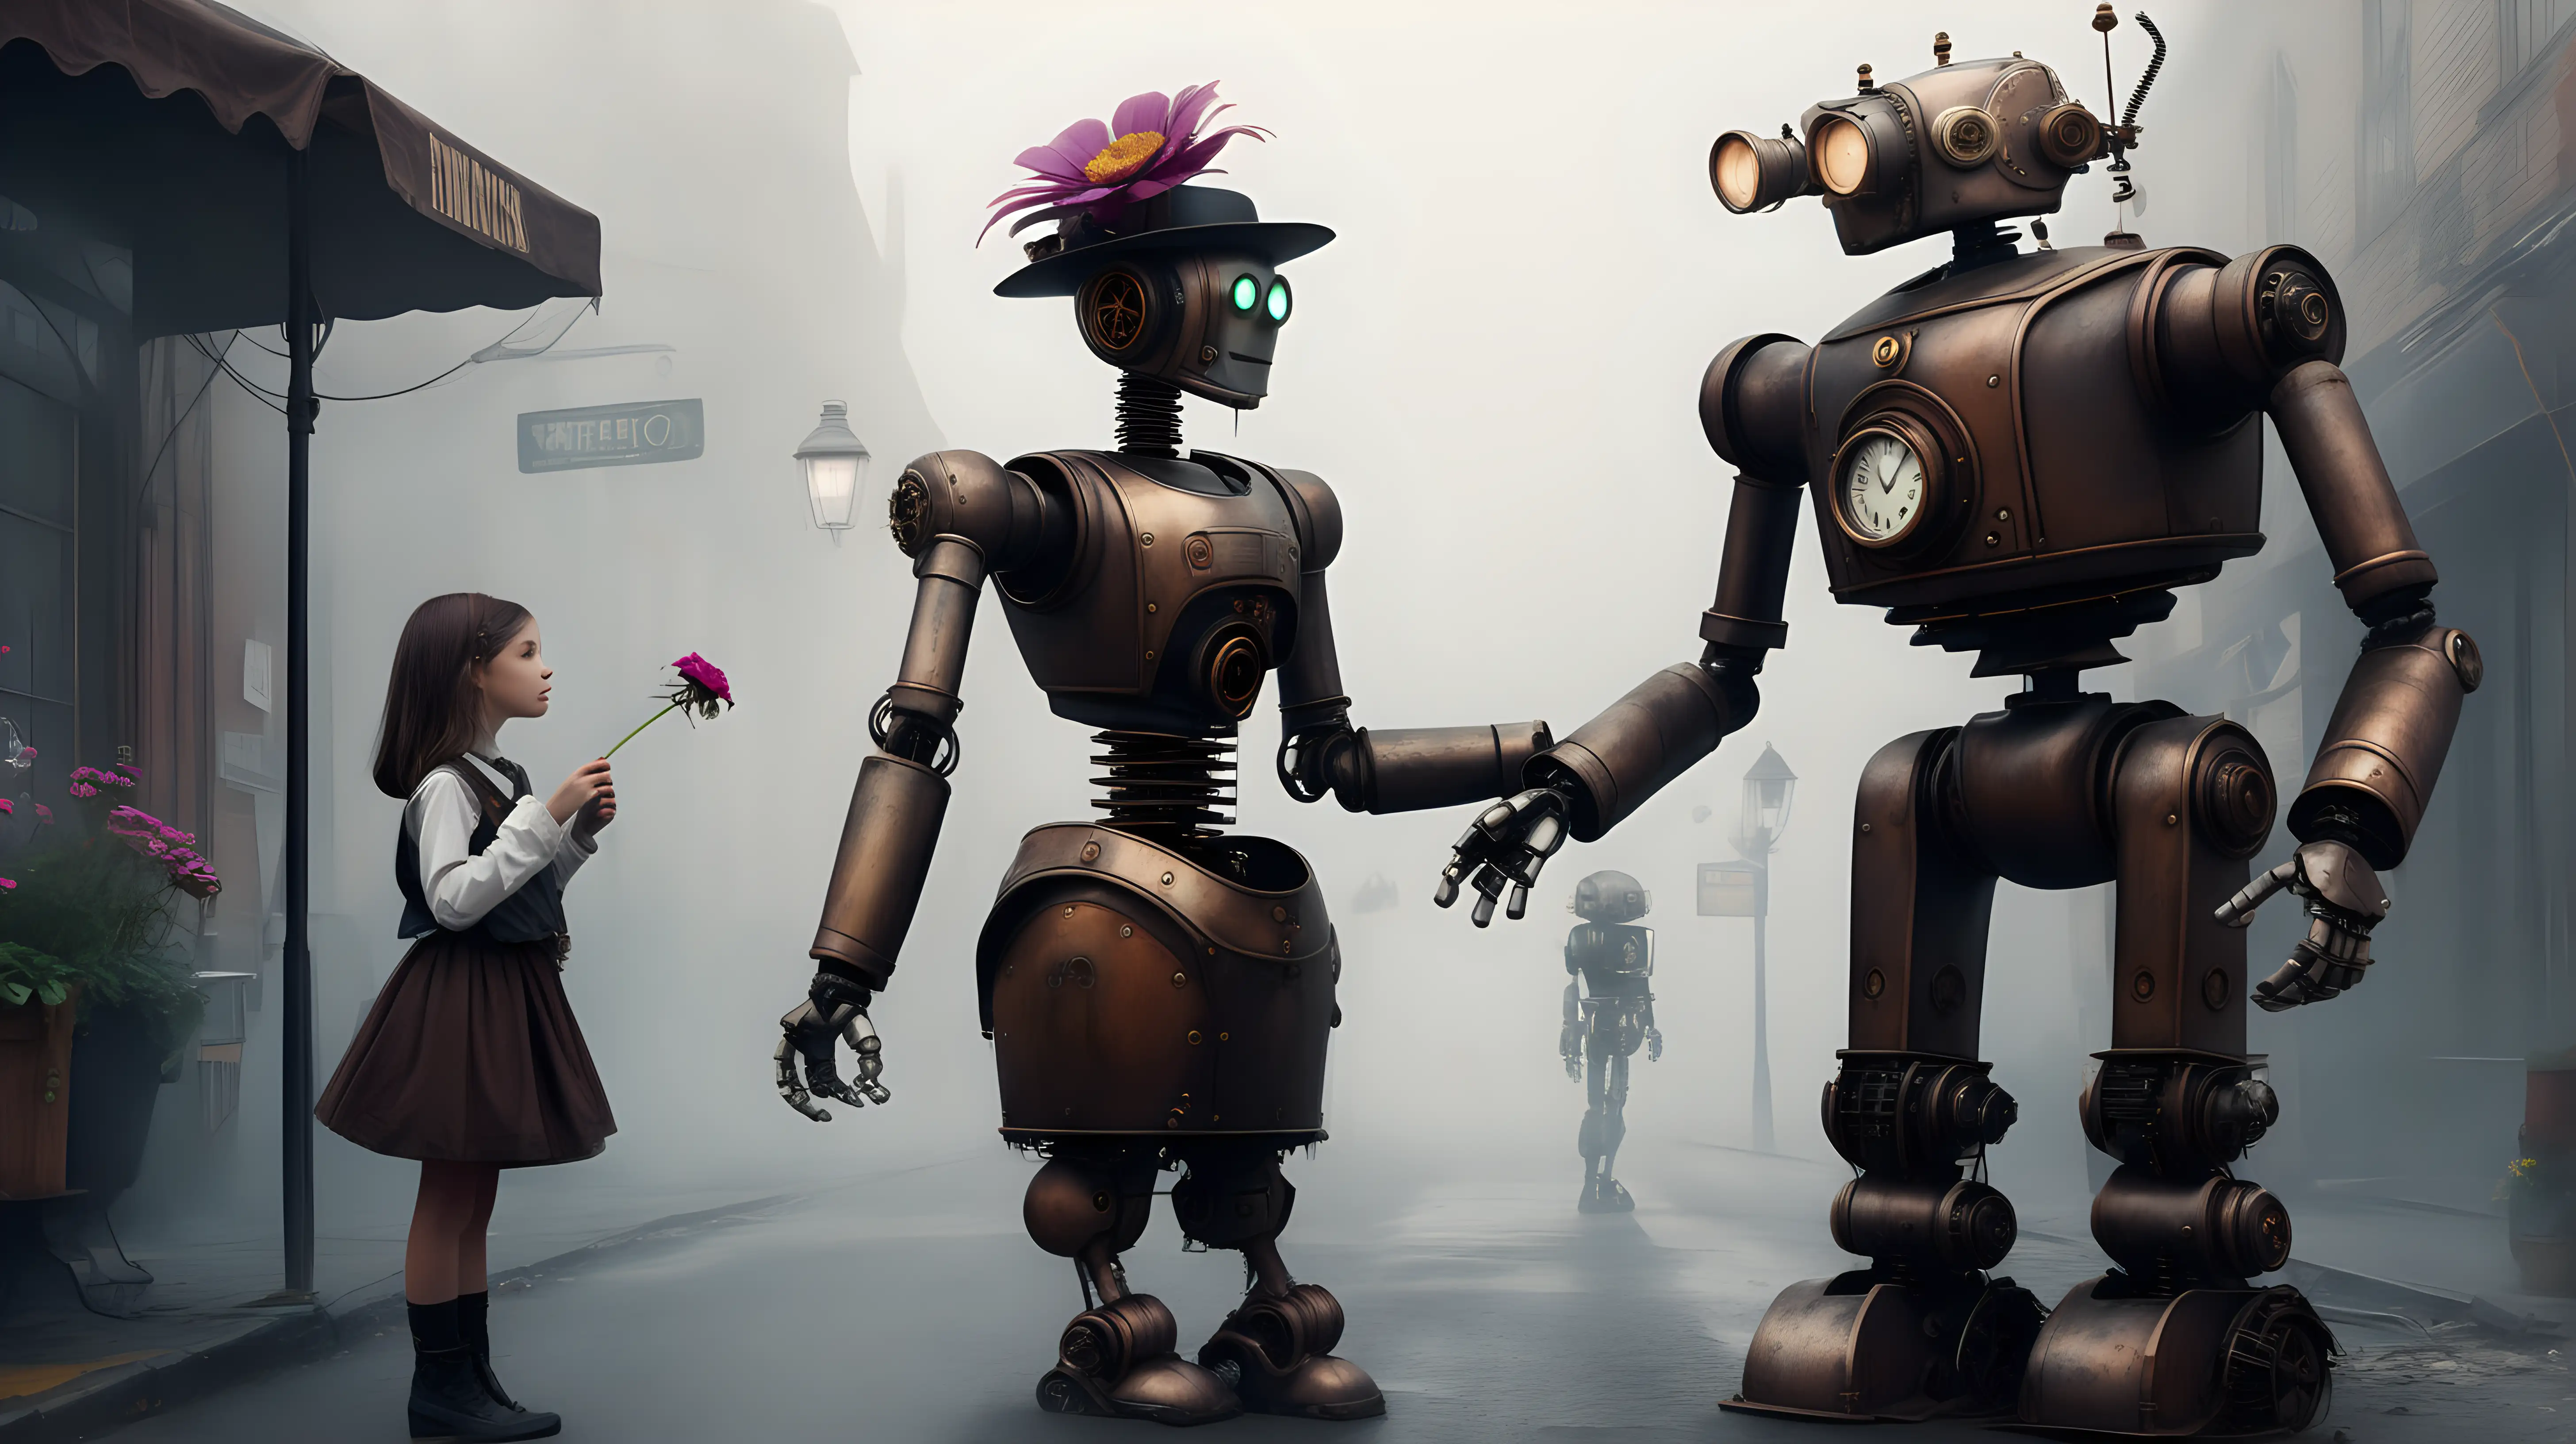 Steampunk robot, talking to a girl standing with a flower, fog, street